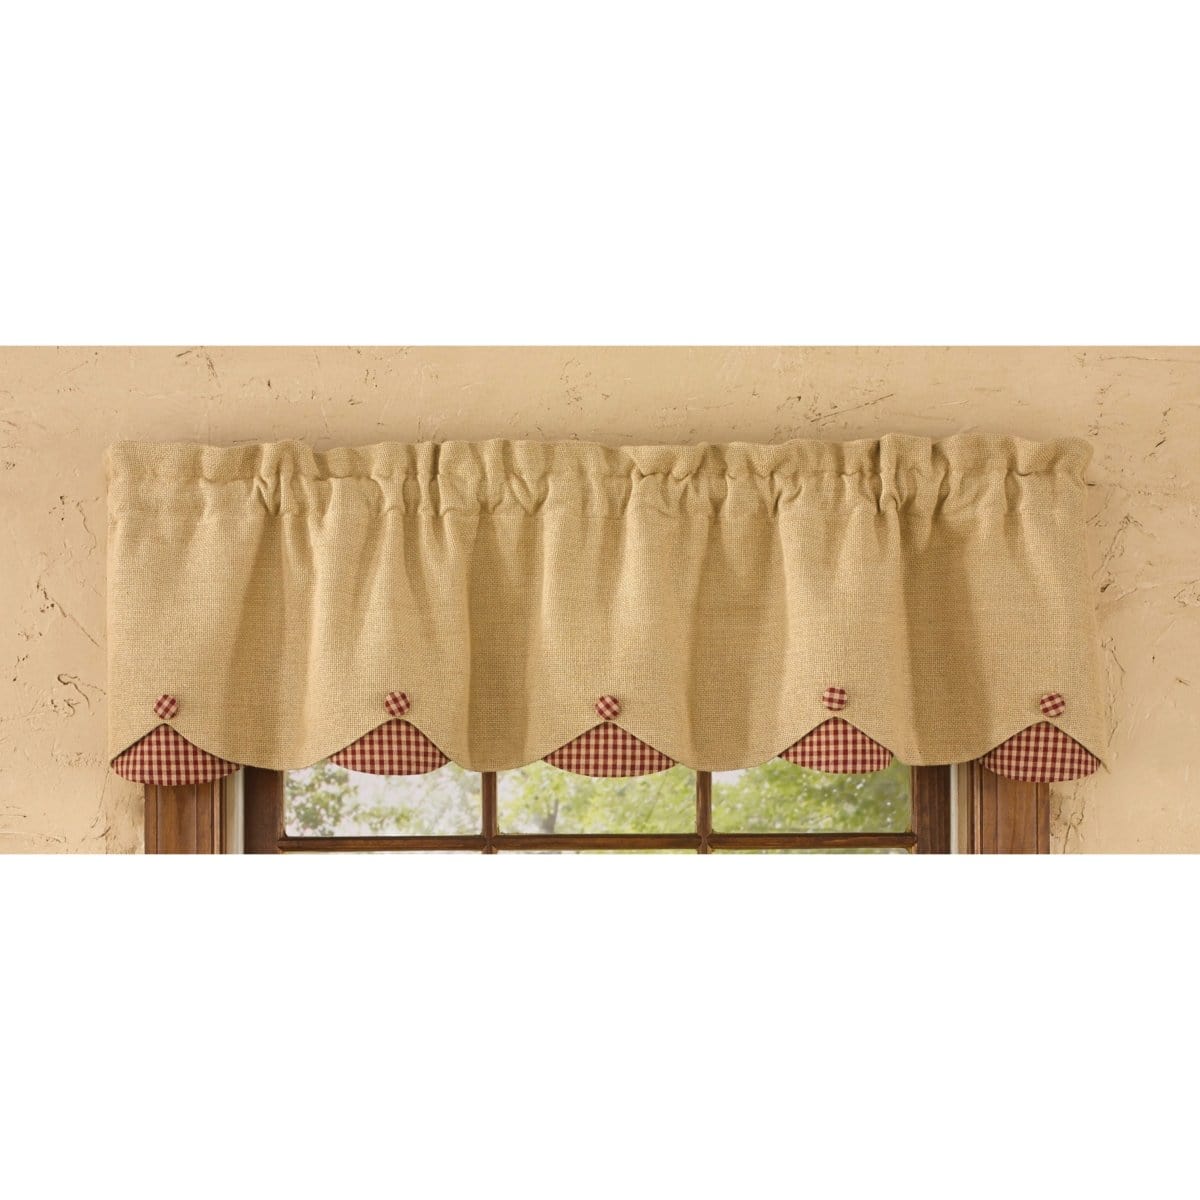 Burlap & Check In Wine Scalloped Valance Lined-Park Designs-The Village Merchant